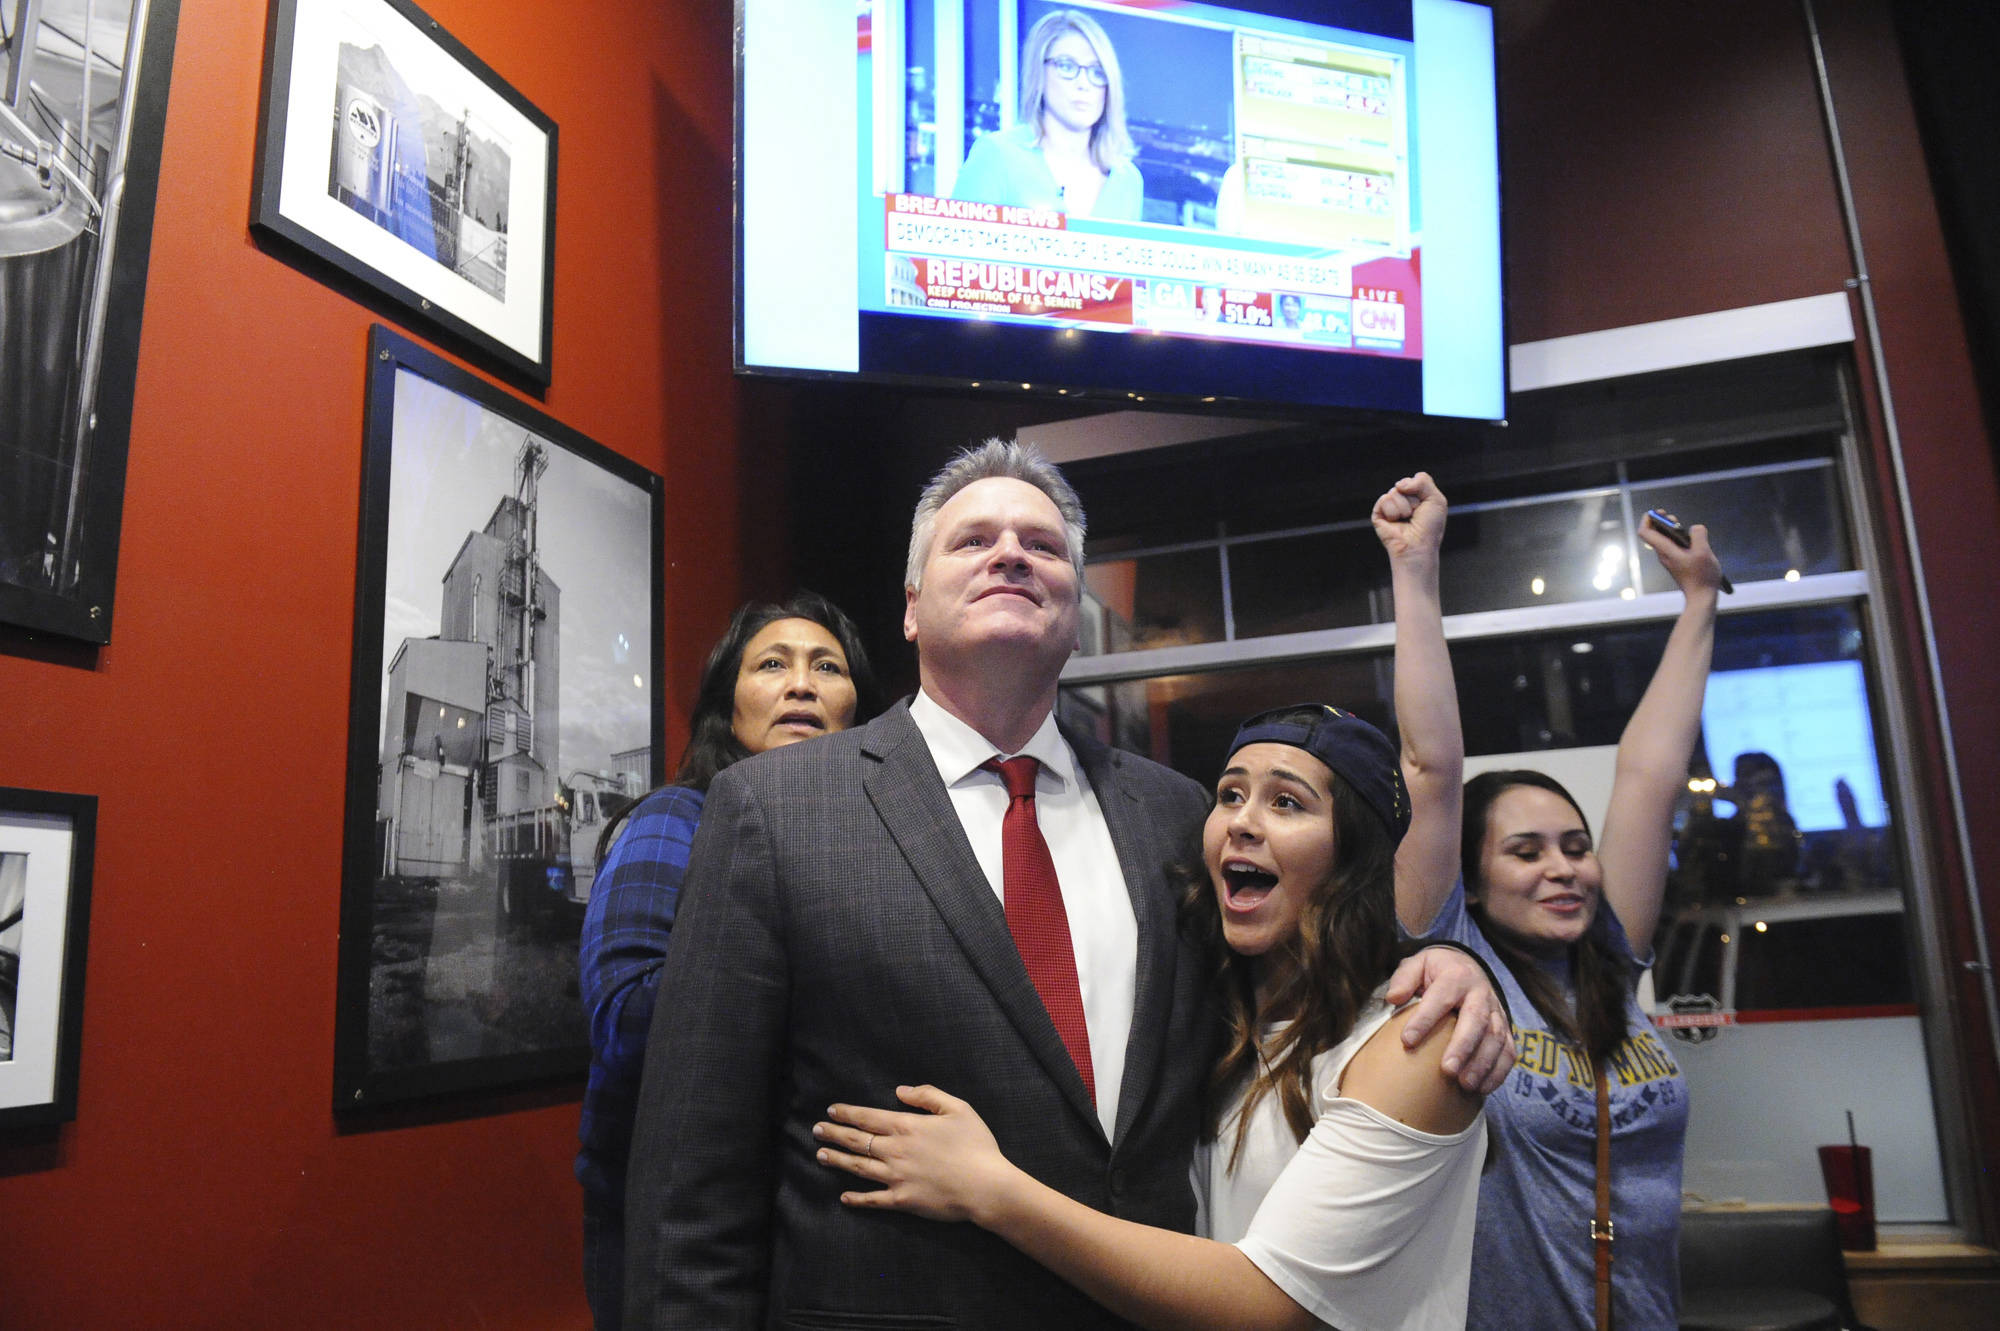 Republican gubernatorial candidate Mike Dunleavy reacts to early favorable election returns Tuesday, Nov. 6, 2018 In Anchorage, Alaska. With Dunleavy are from left, his wife Rose and daughters Ceil and Maggie. (AP Photo/Michael Dinneen)